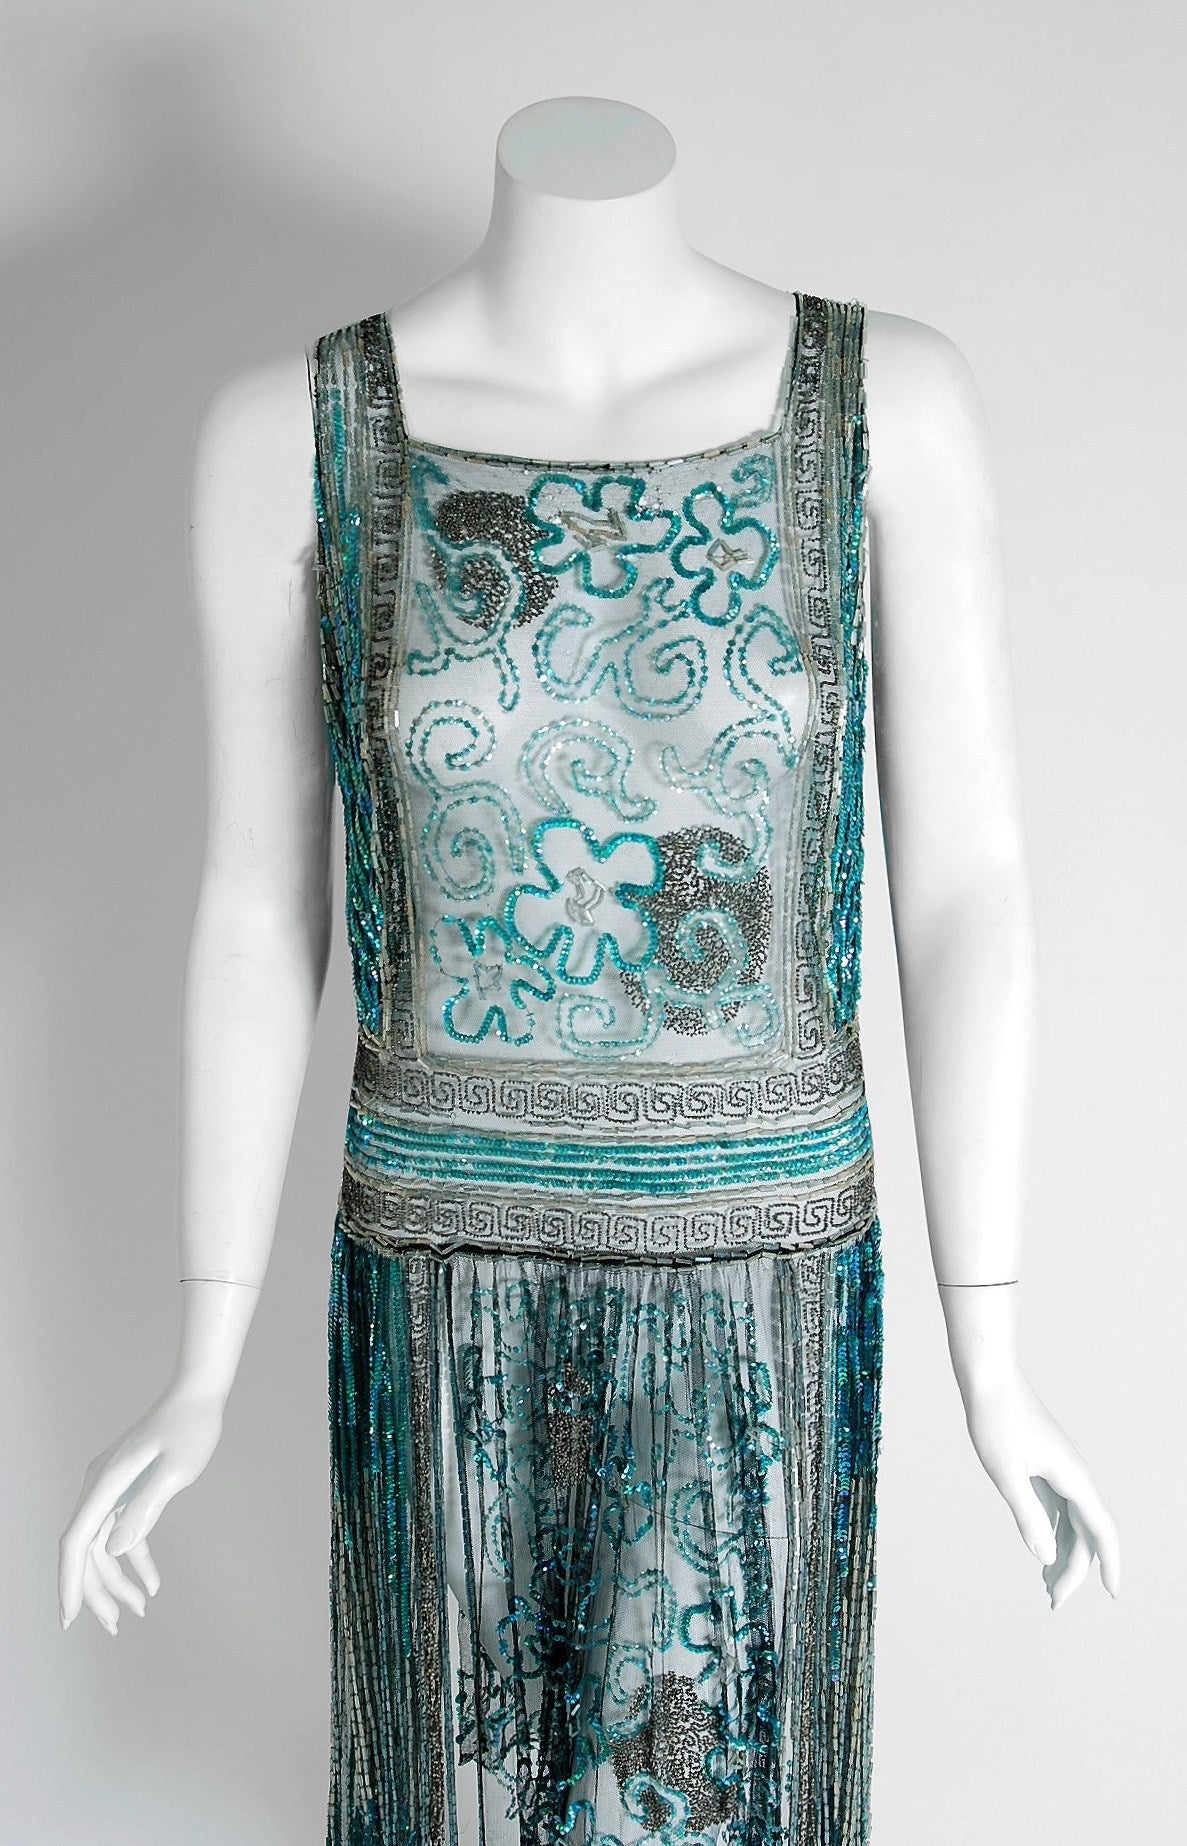 There are lots of lovely 1920's garments still around, but every once in a while I come across one that sets my heart a flutter! This is an extraordinarily beautiful and exceptional 1920's French museum quality sheer net-tulle dance dress.